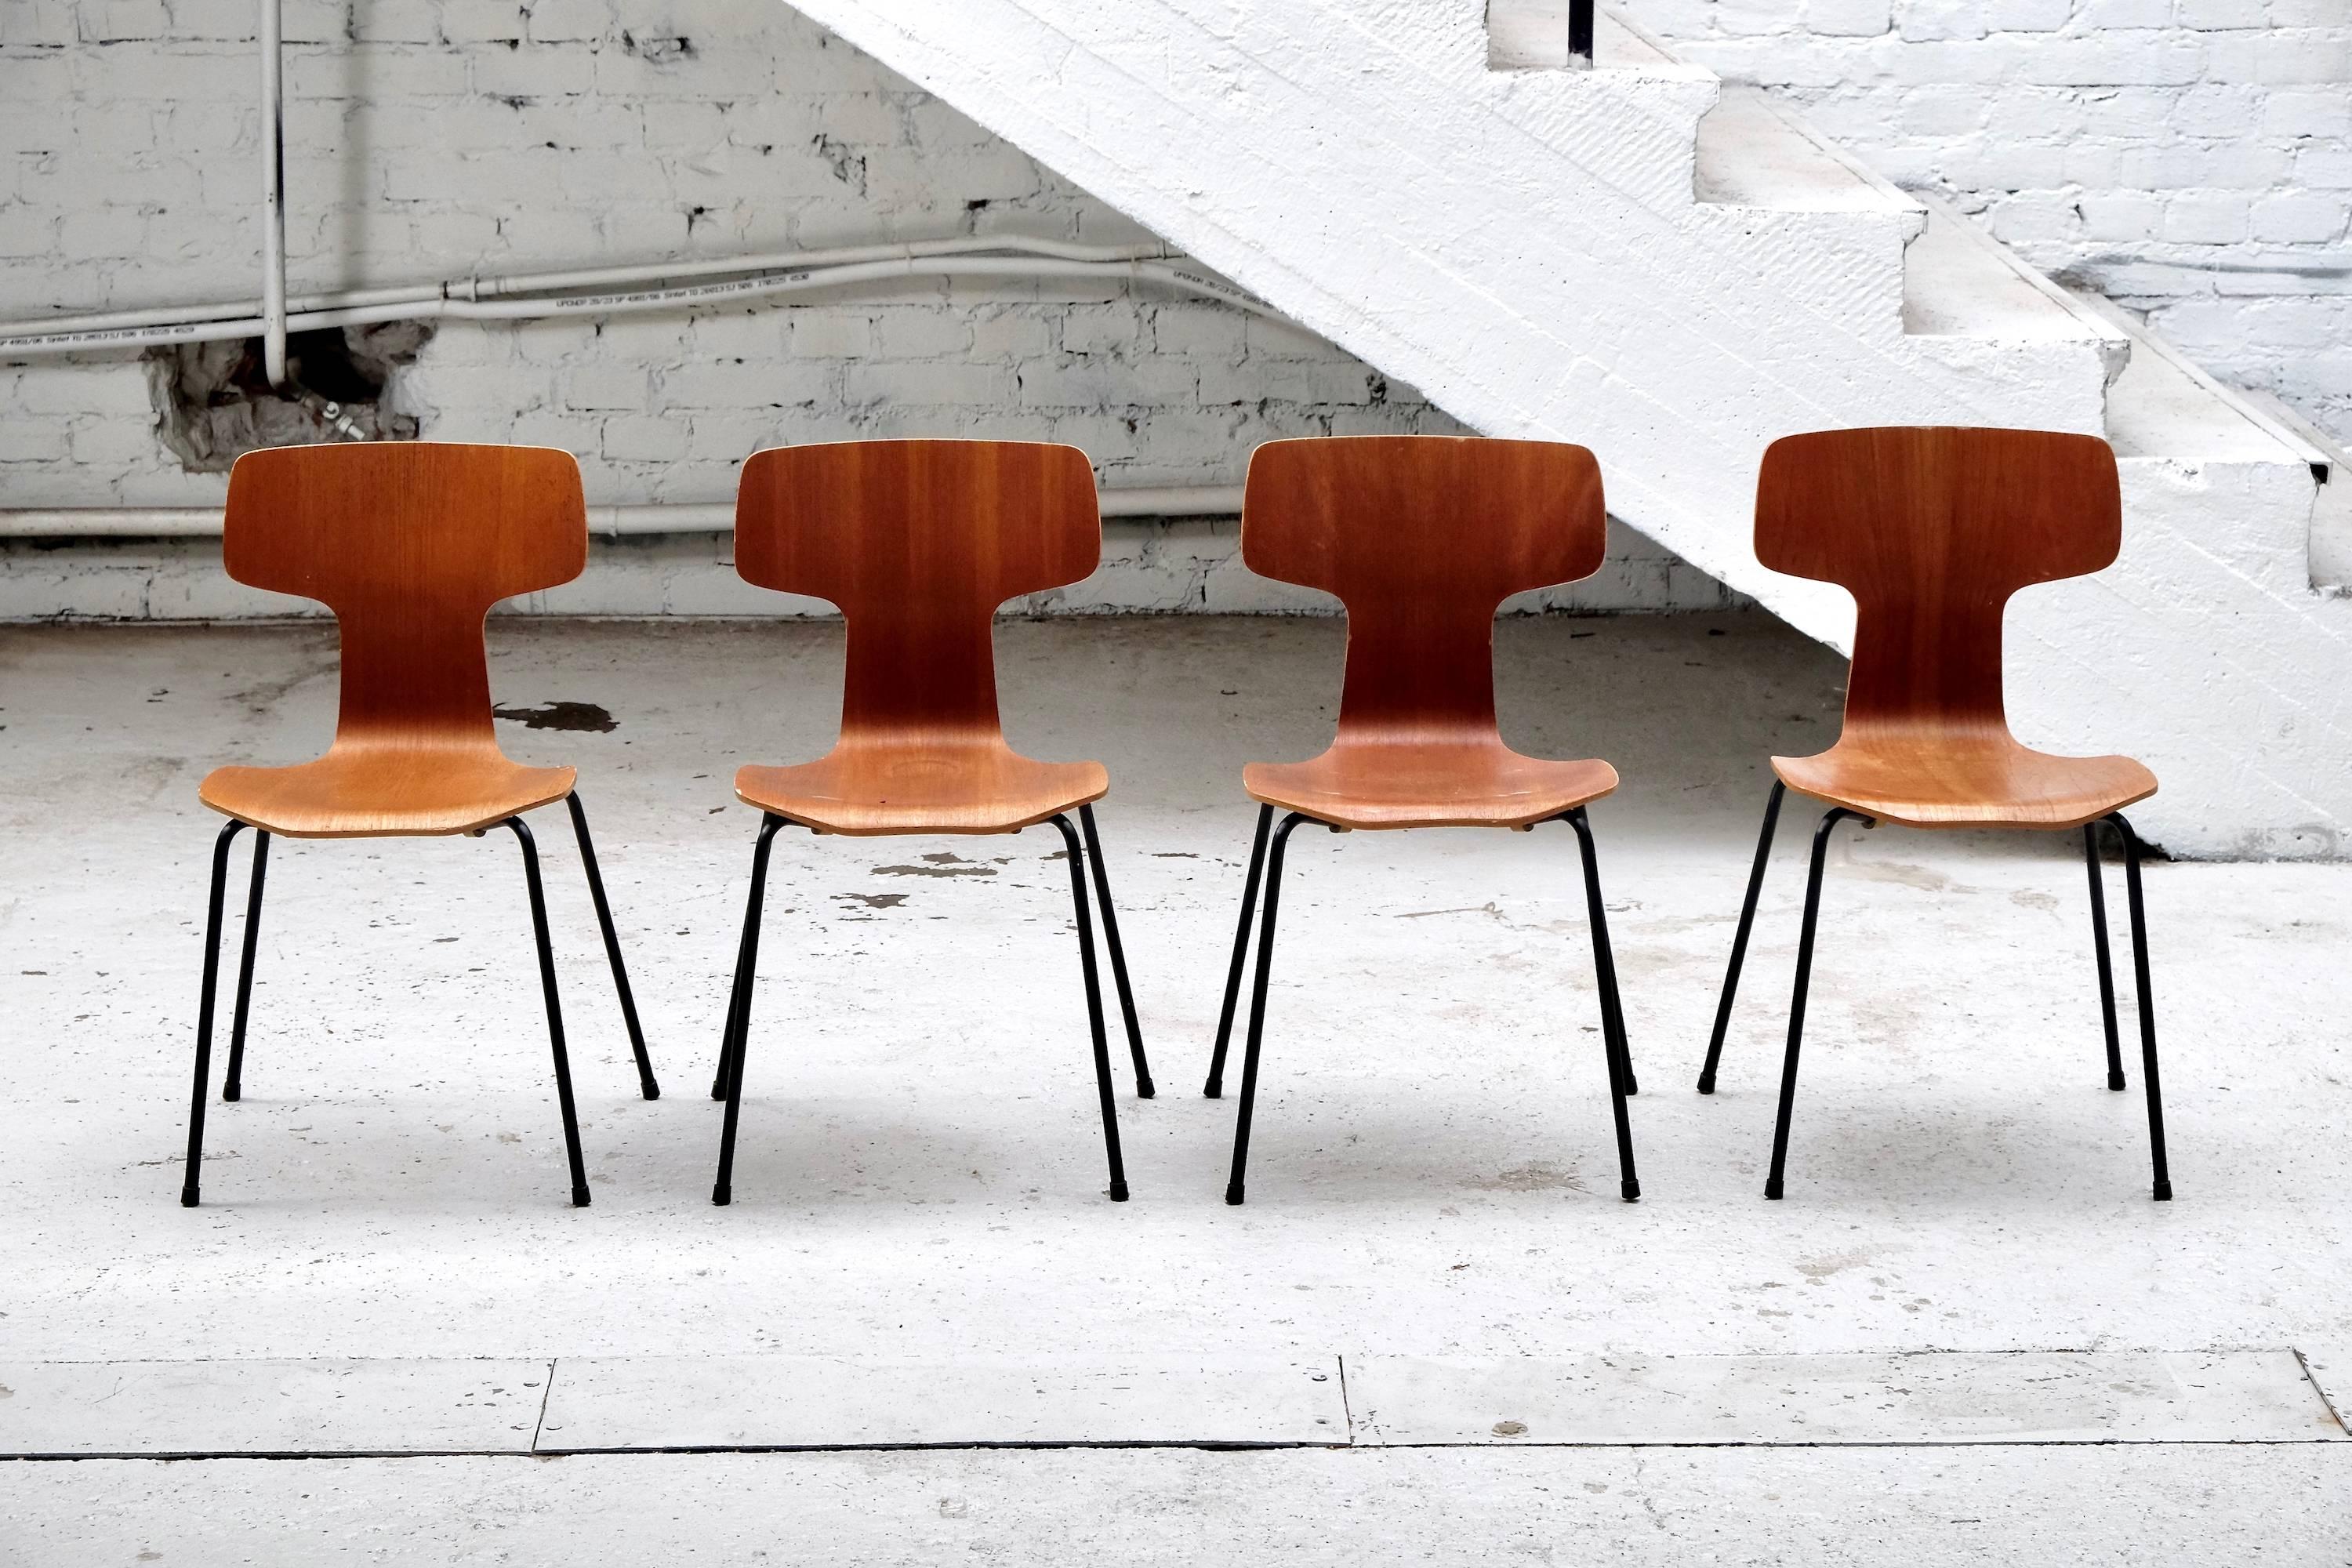 Set of four teak veneered chairs model 3103 by Arne Jacobsen. Black rubber coated tubular steel legs. Designed in 1957, these four chairs were produced by Fritz Hansen in 1964. They were only produced for a period of around 15 years.